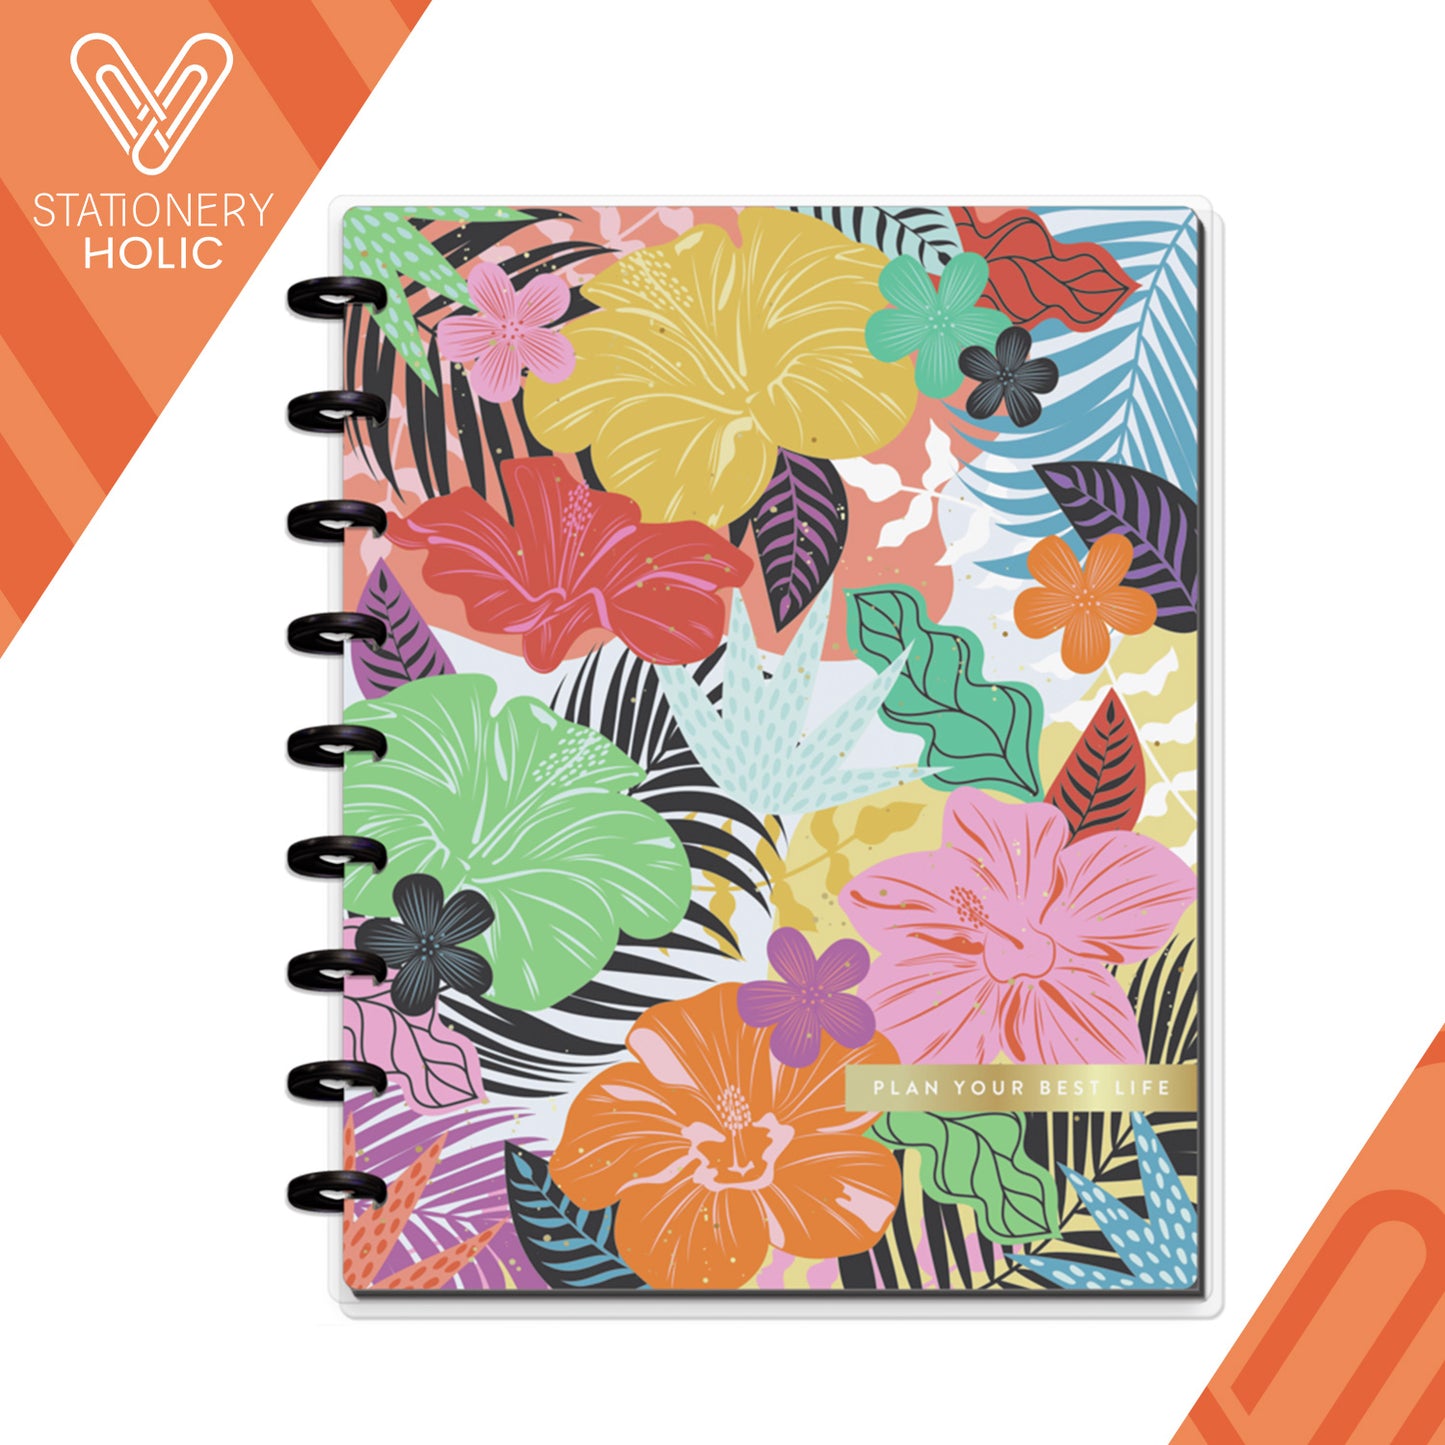 Happy Planner - Happy Notes Classic - Bold and Botanical